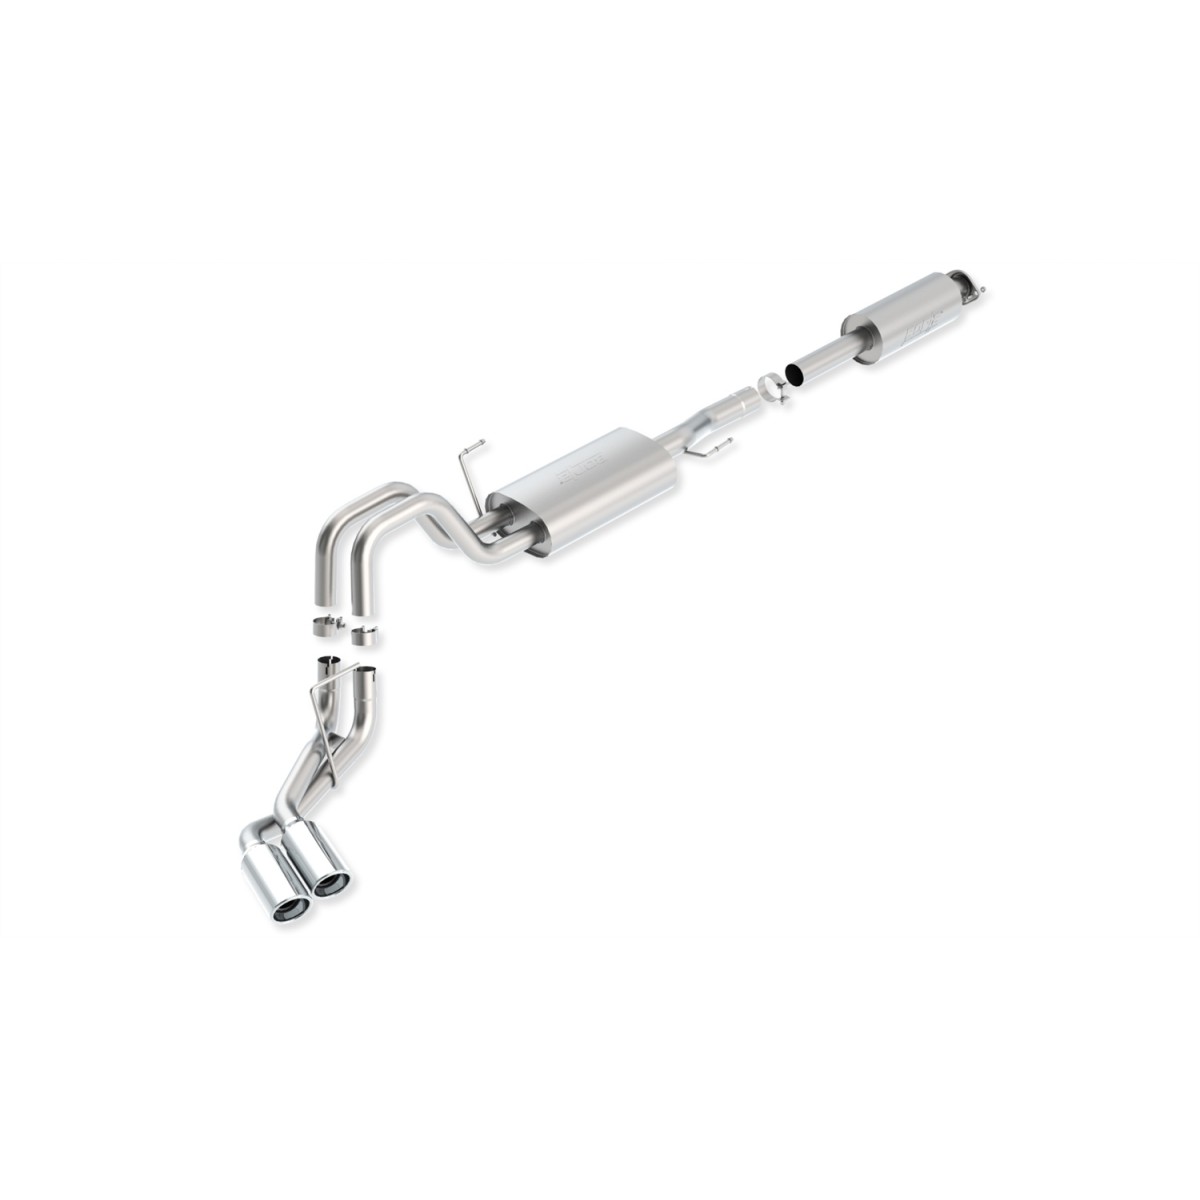 140415 Borla Exhaust System New for F150 Truck Ford F-150 2011-2014 | eBay